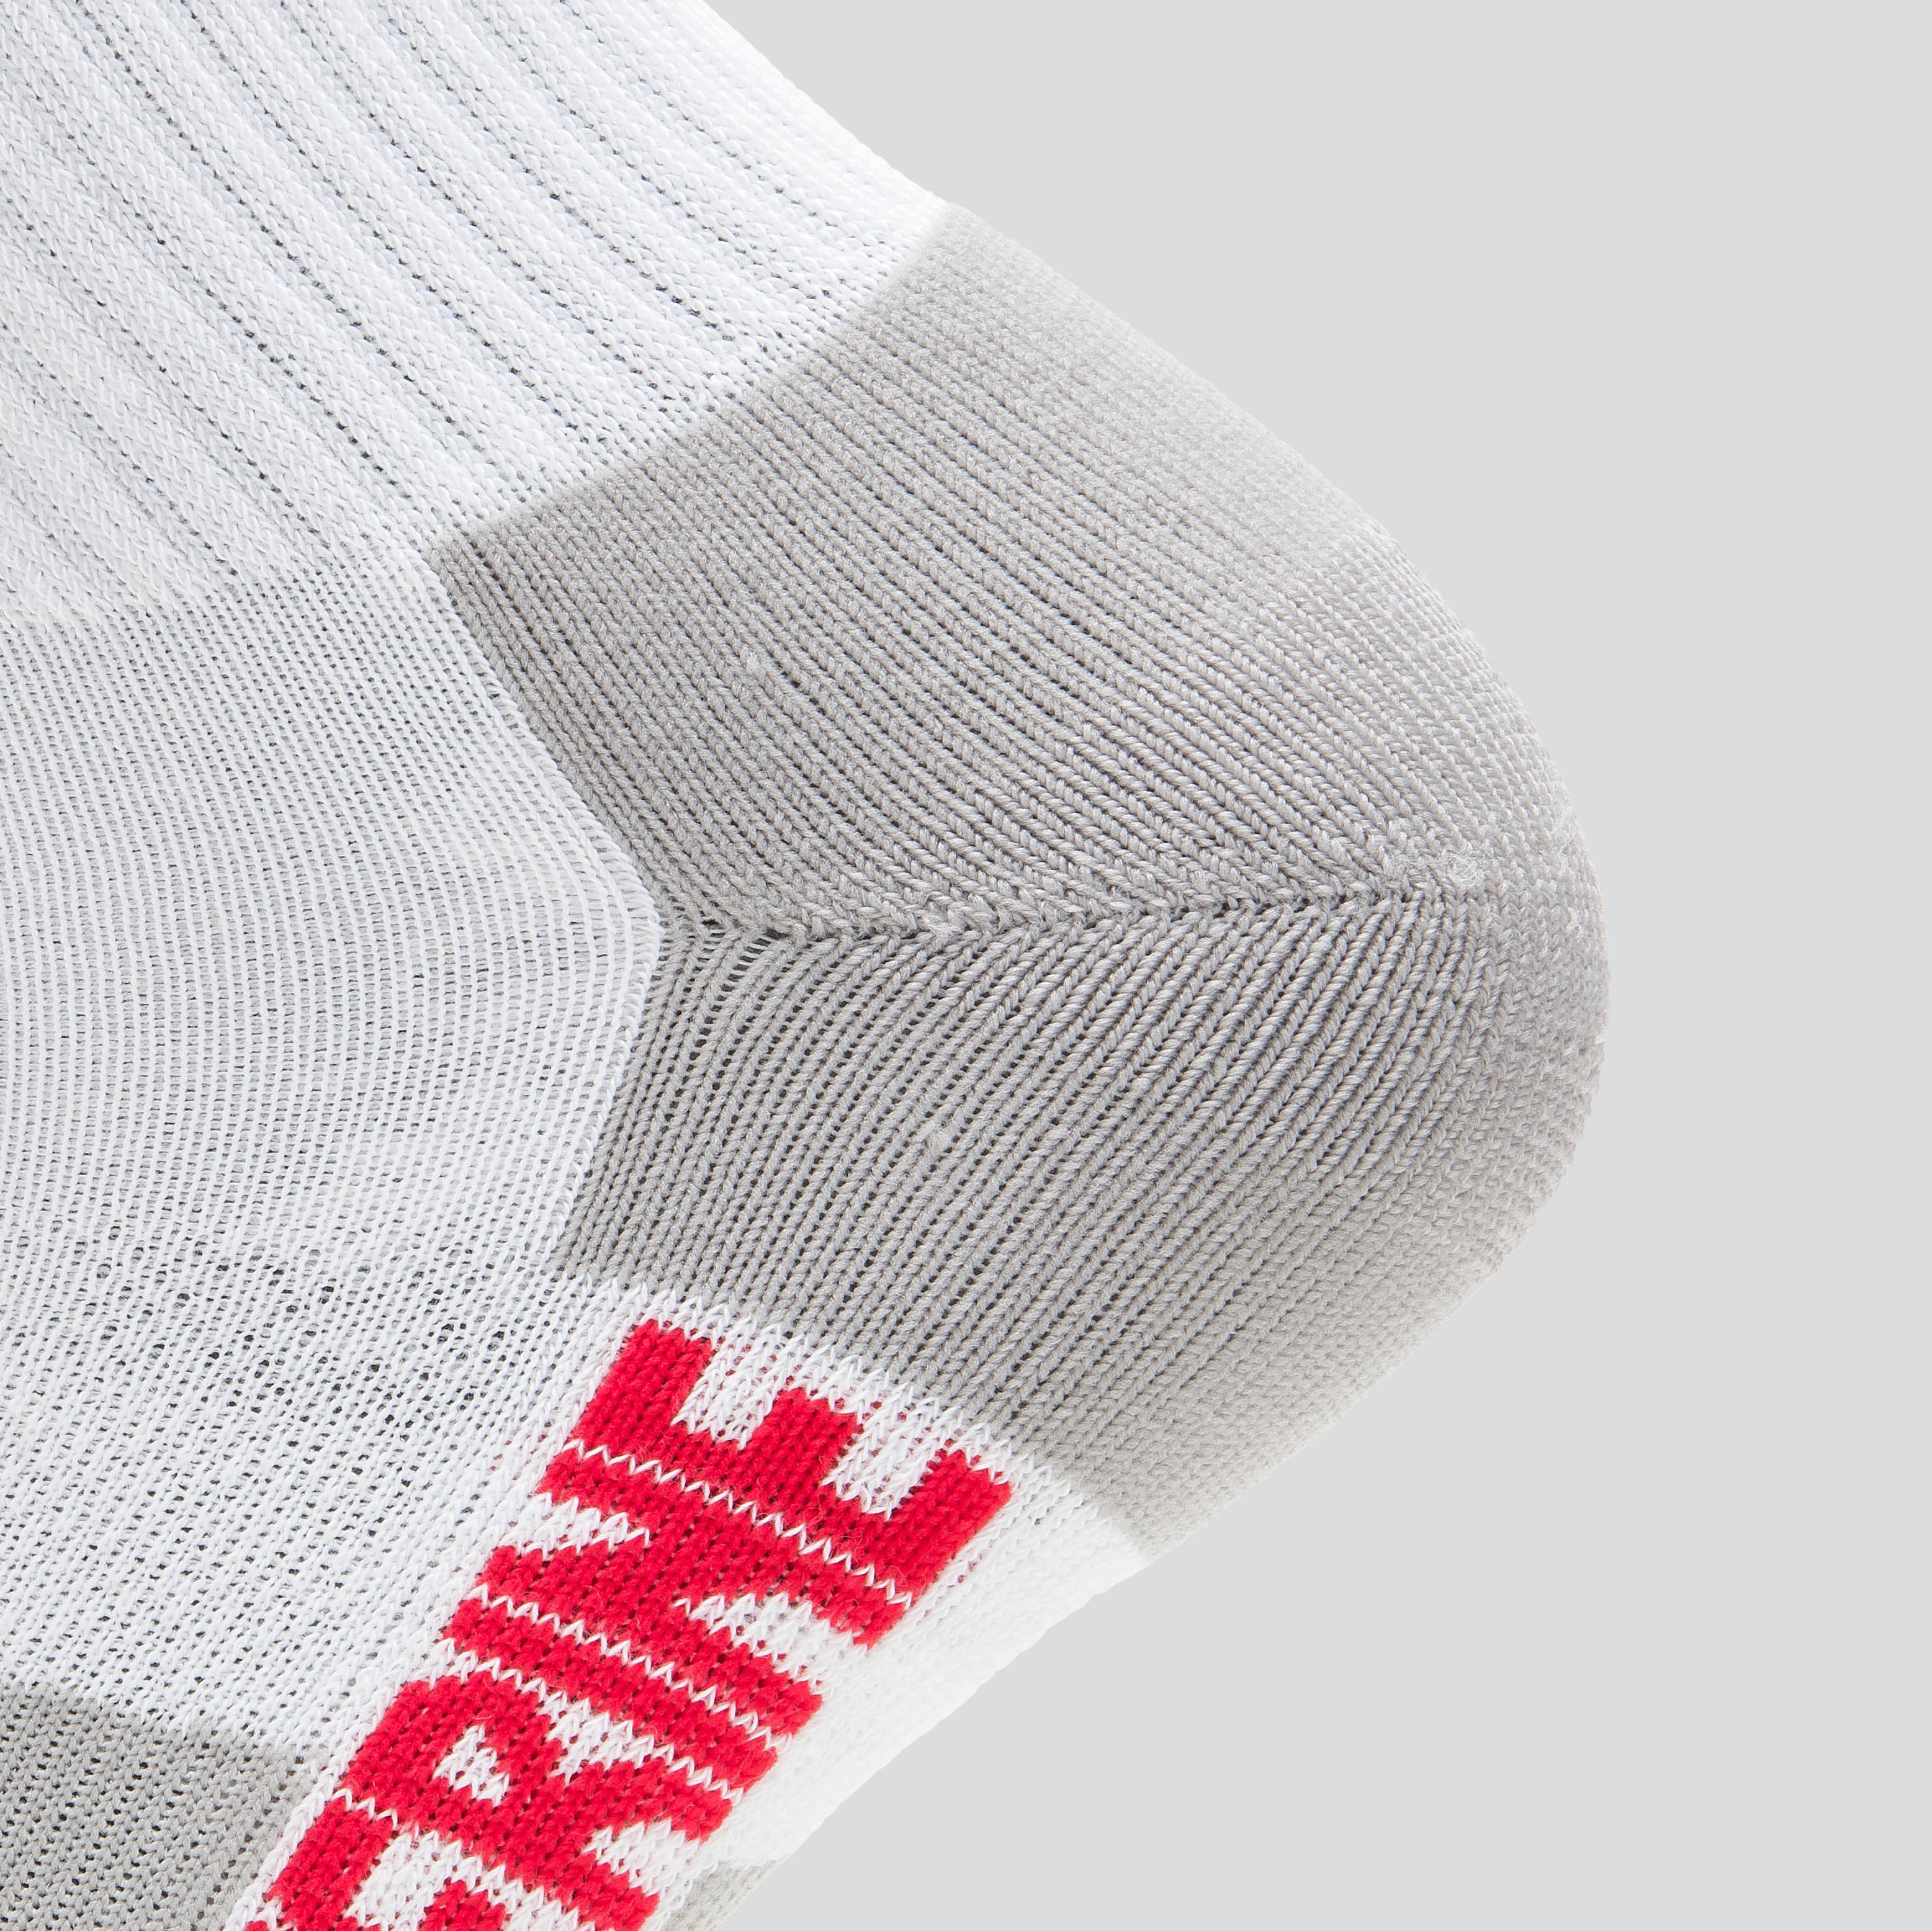 High quality socks from Wolverine